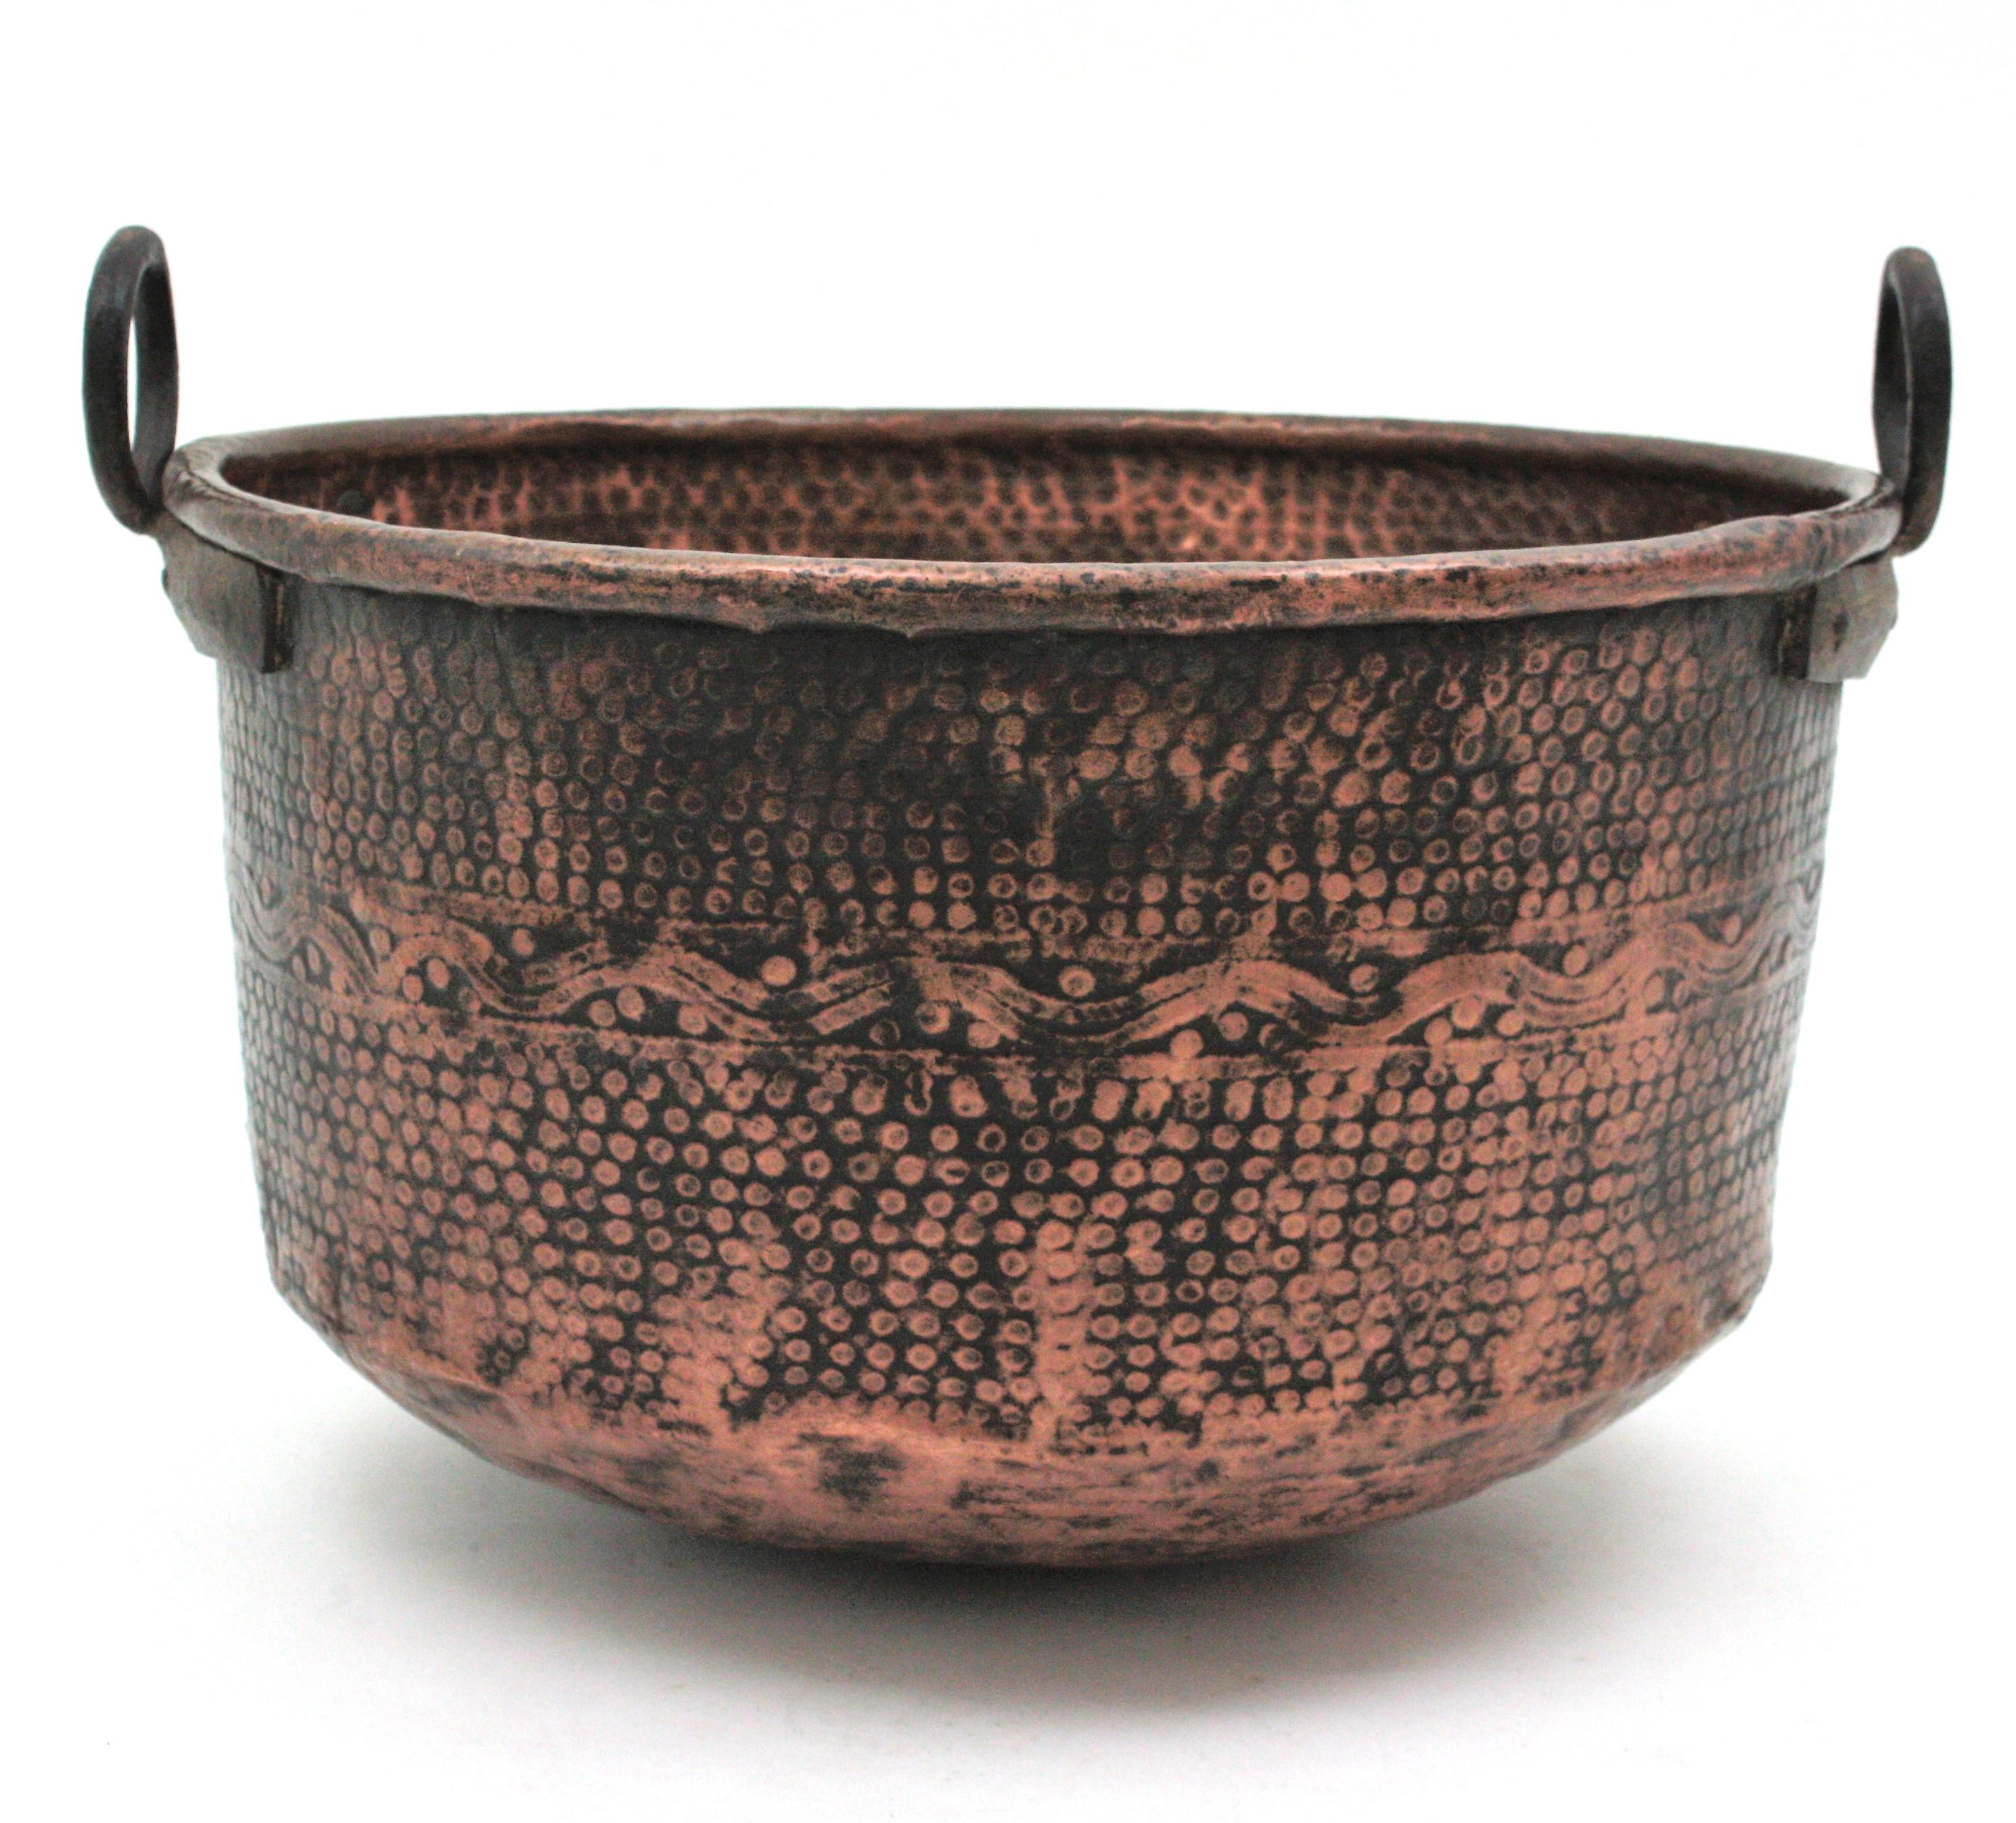 Oversized hand-hammered copper cauldron with iron handles, Spain, 1930s-1940s.
This handcrafted copper cauldron has a dramatic aged patina. The copper nicely addorned by decorative hand hammered patterns and it is heavily marked by the pass of time